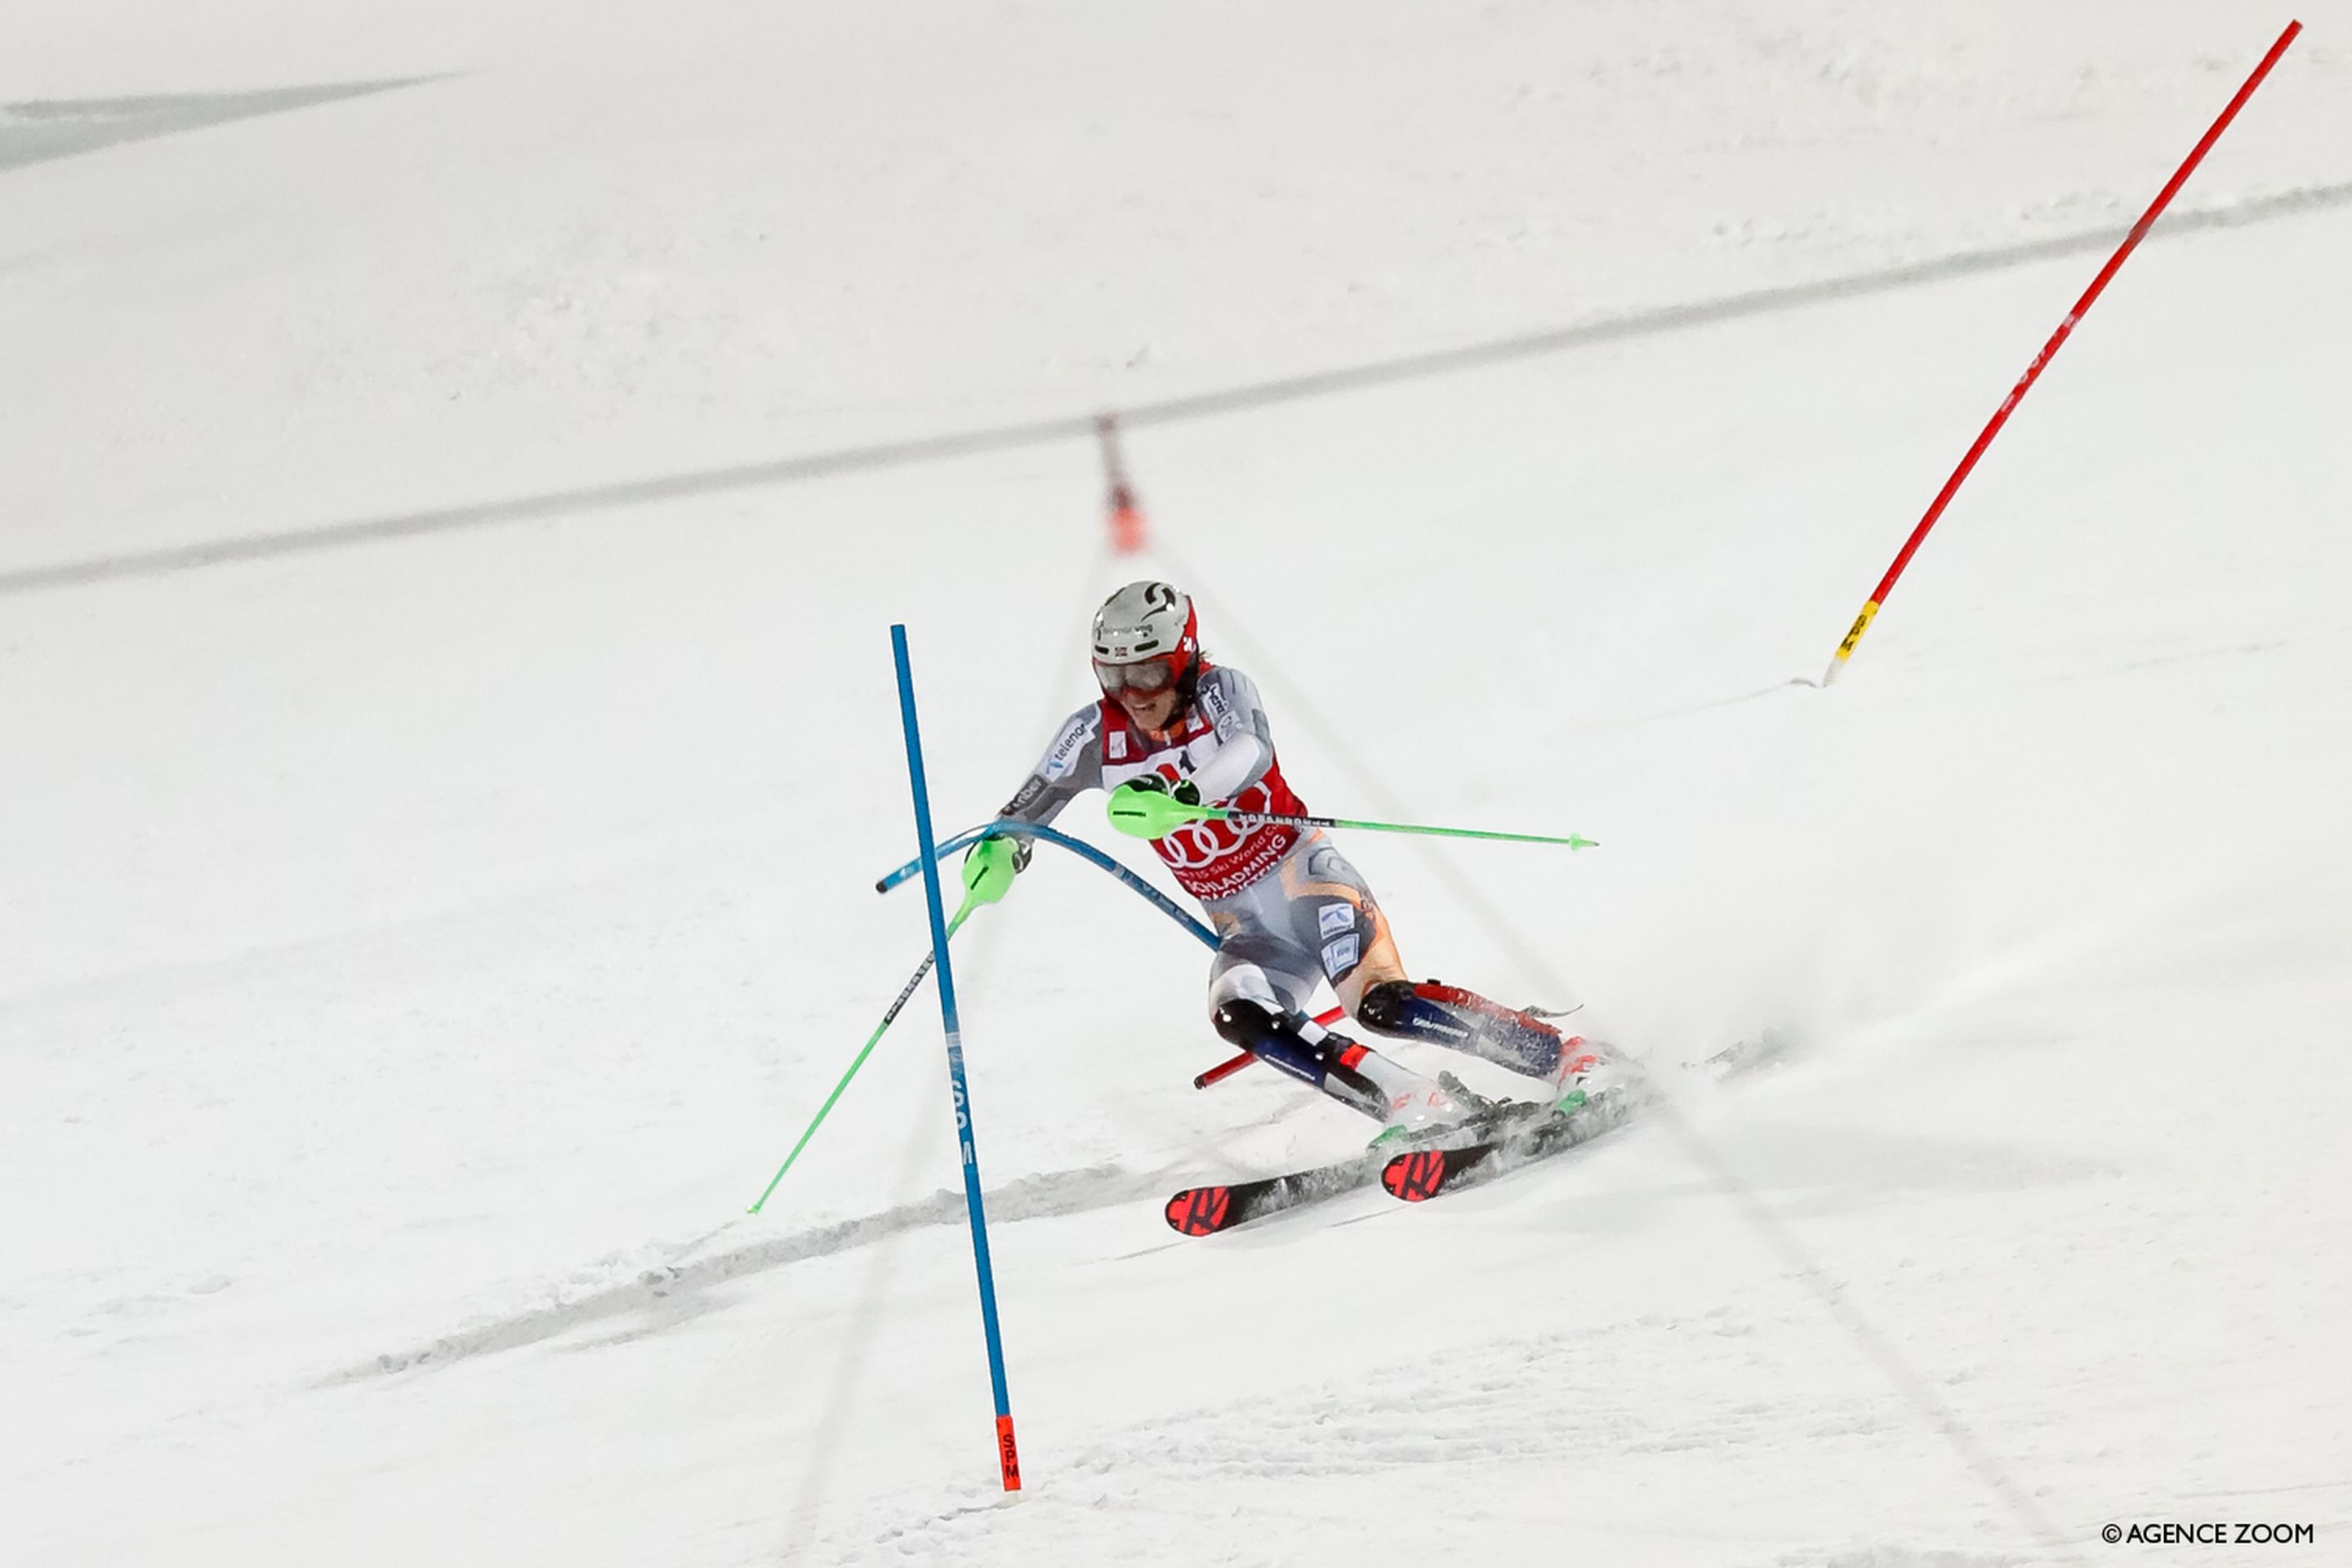 SCHLADMING, AUSTRIA - JANUARY 28 : Henrik Kristoffersen of Norway competes during the Audi FIS Alpine Ski World Cup Men's Slalom on January 28, 2020 in Schladming Austria. (Photo by Hans Bezard/Agence Zoom)